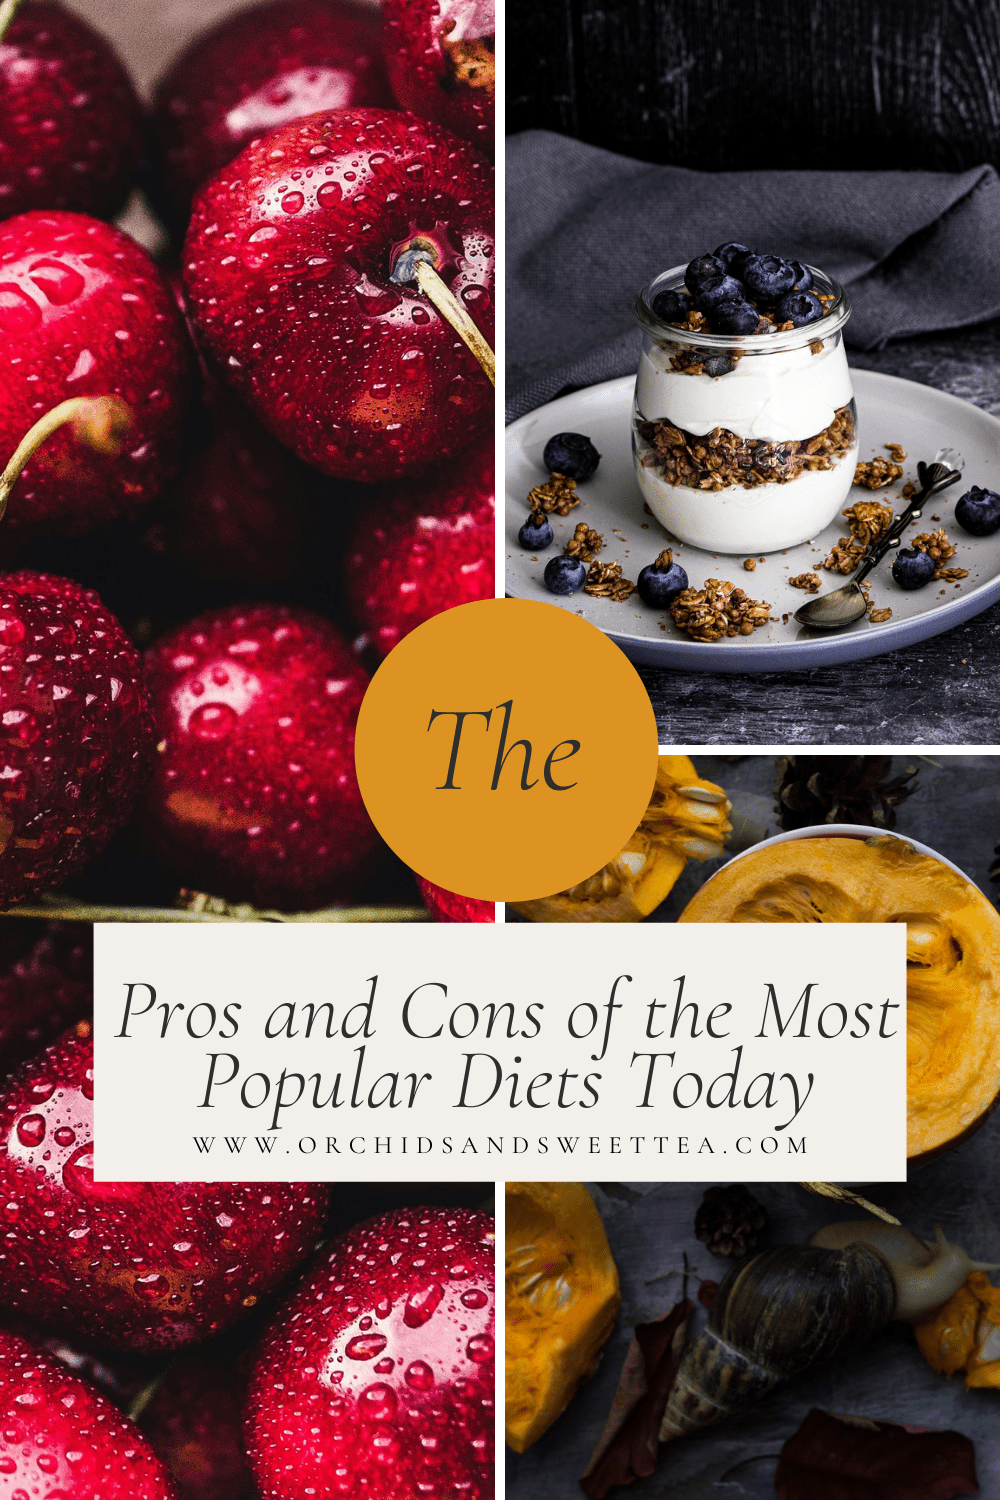 Pros and Cons of the Most Popular Diets Today